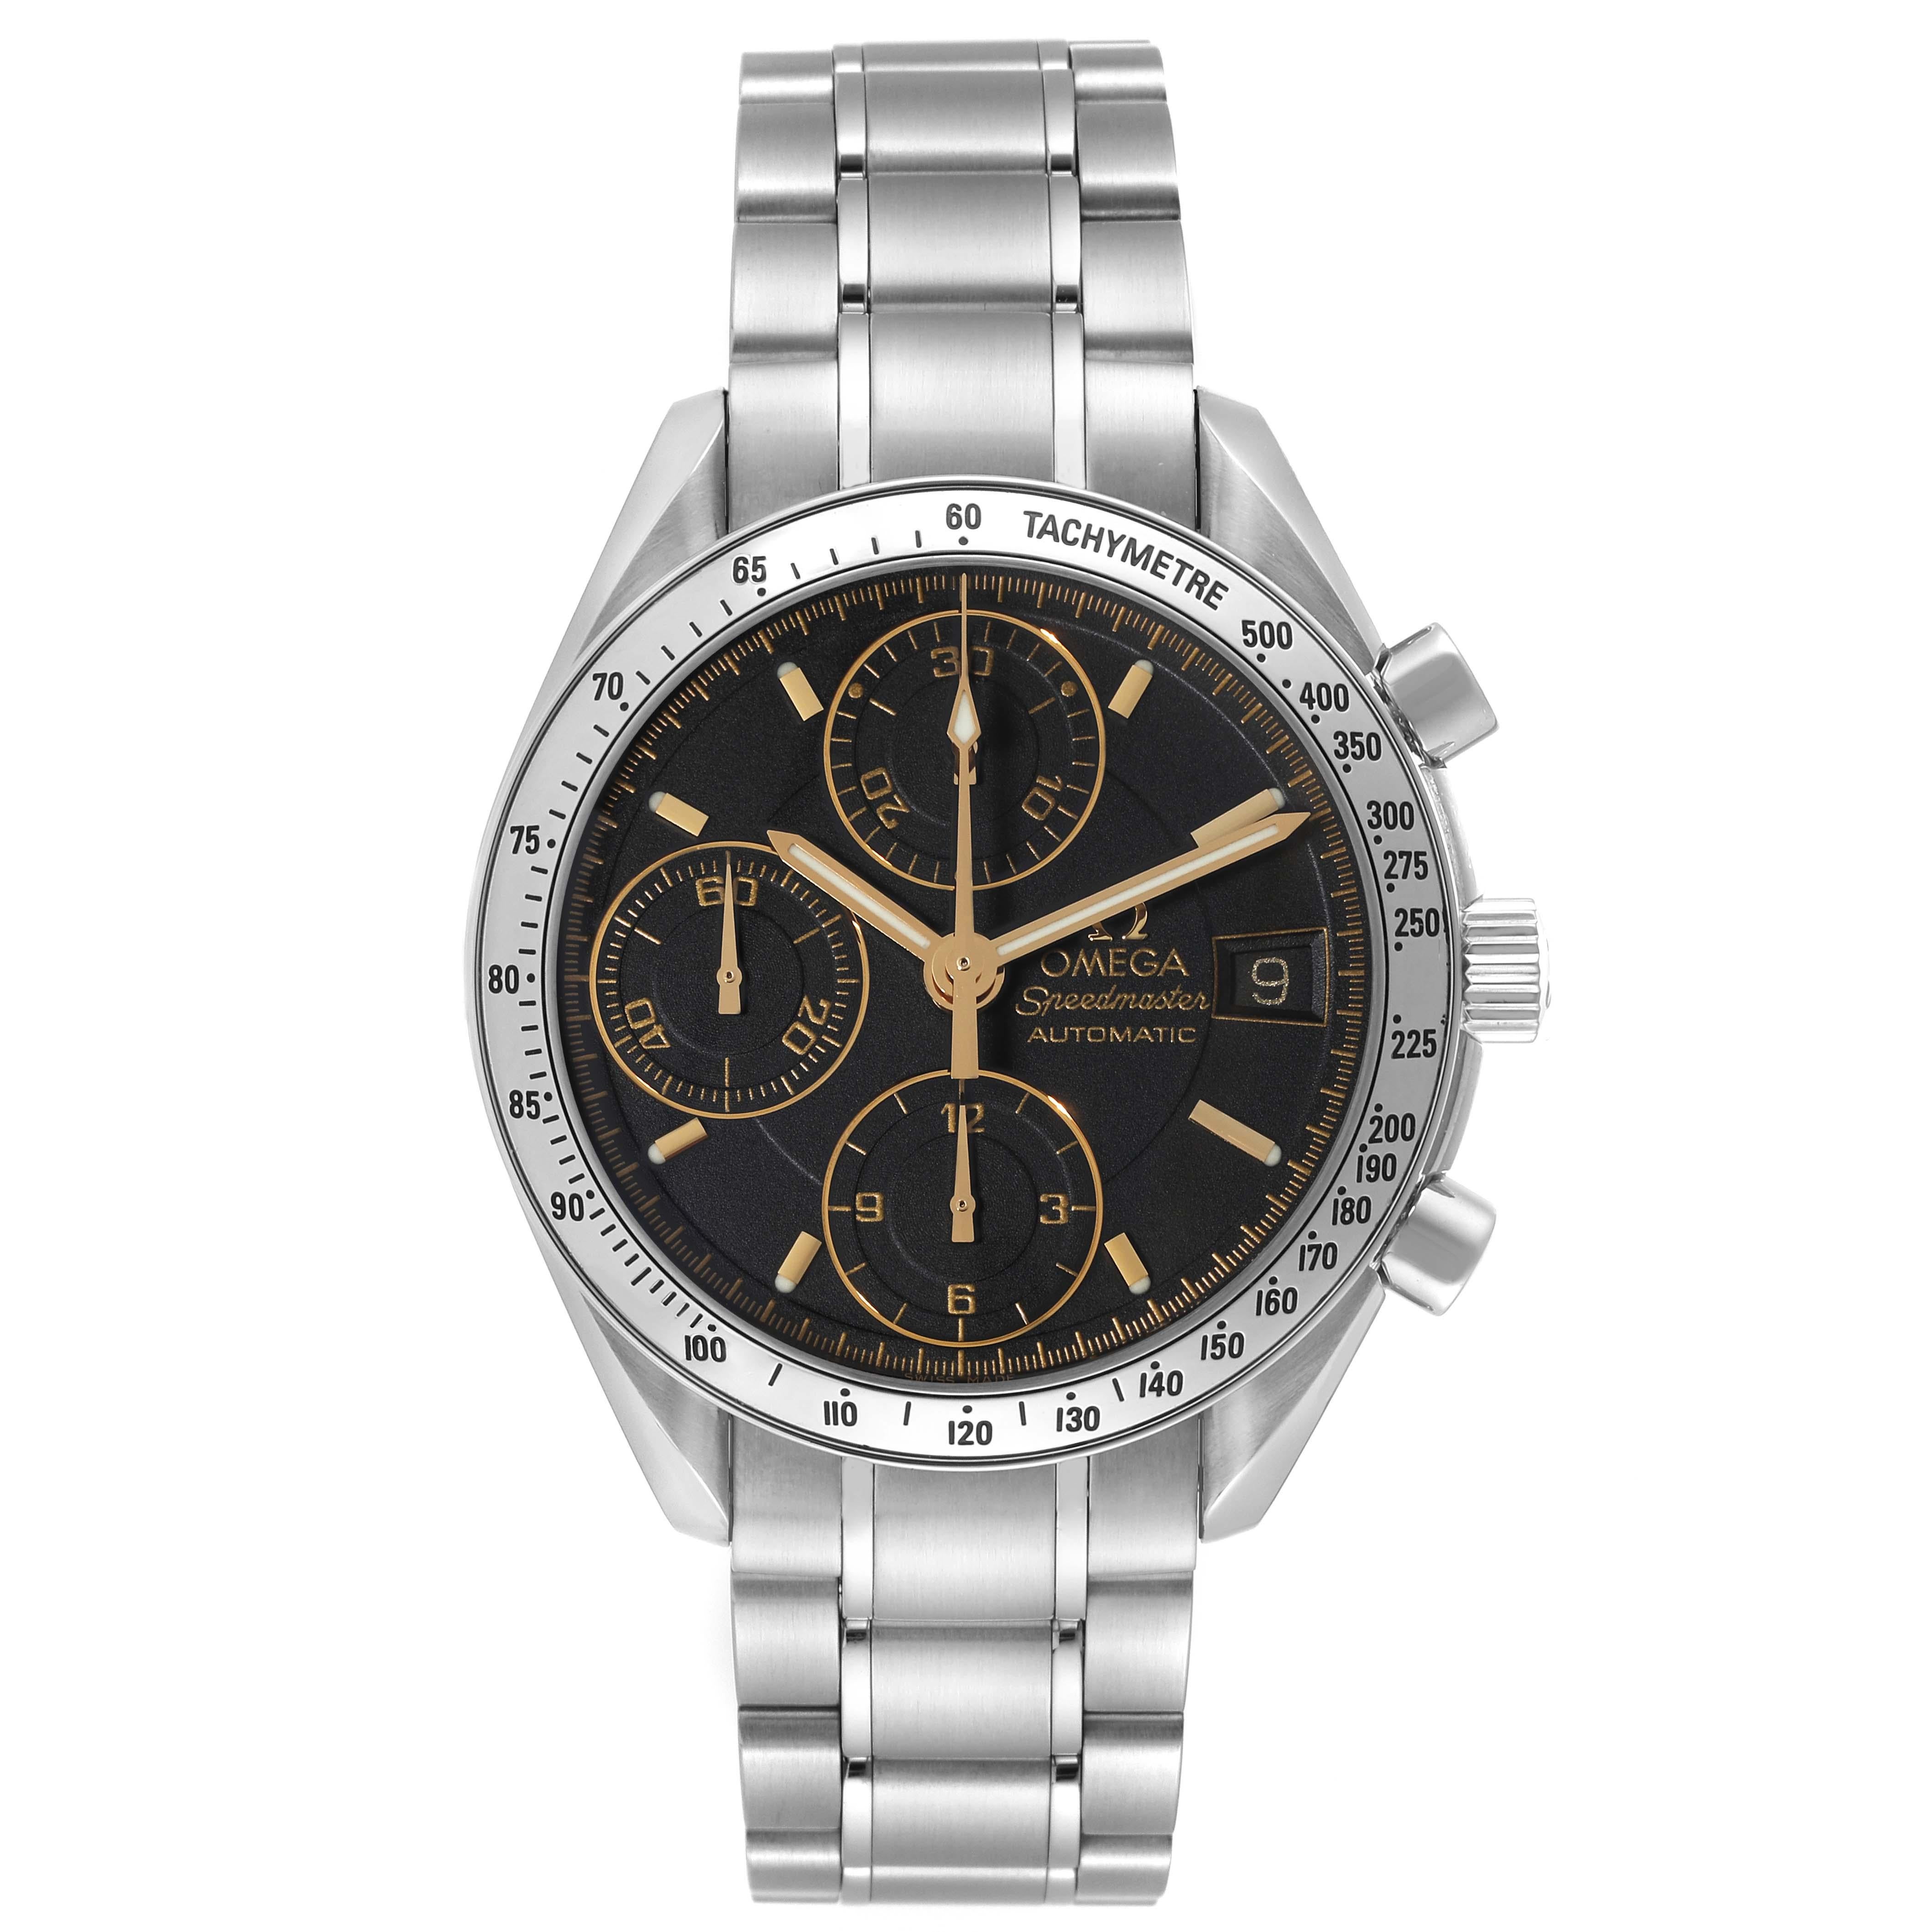 Omega Speedmaster Date Black Dial Steel Mens Watch 3513.54.00. Automatic self-winding chronograph movement. Stainless steel round case 39.0 mm in diameter. Stainless steel bezel with tachymetric scale. Scratch-resistant sapphire crystal with